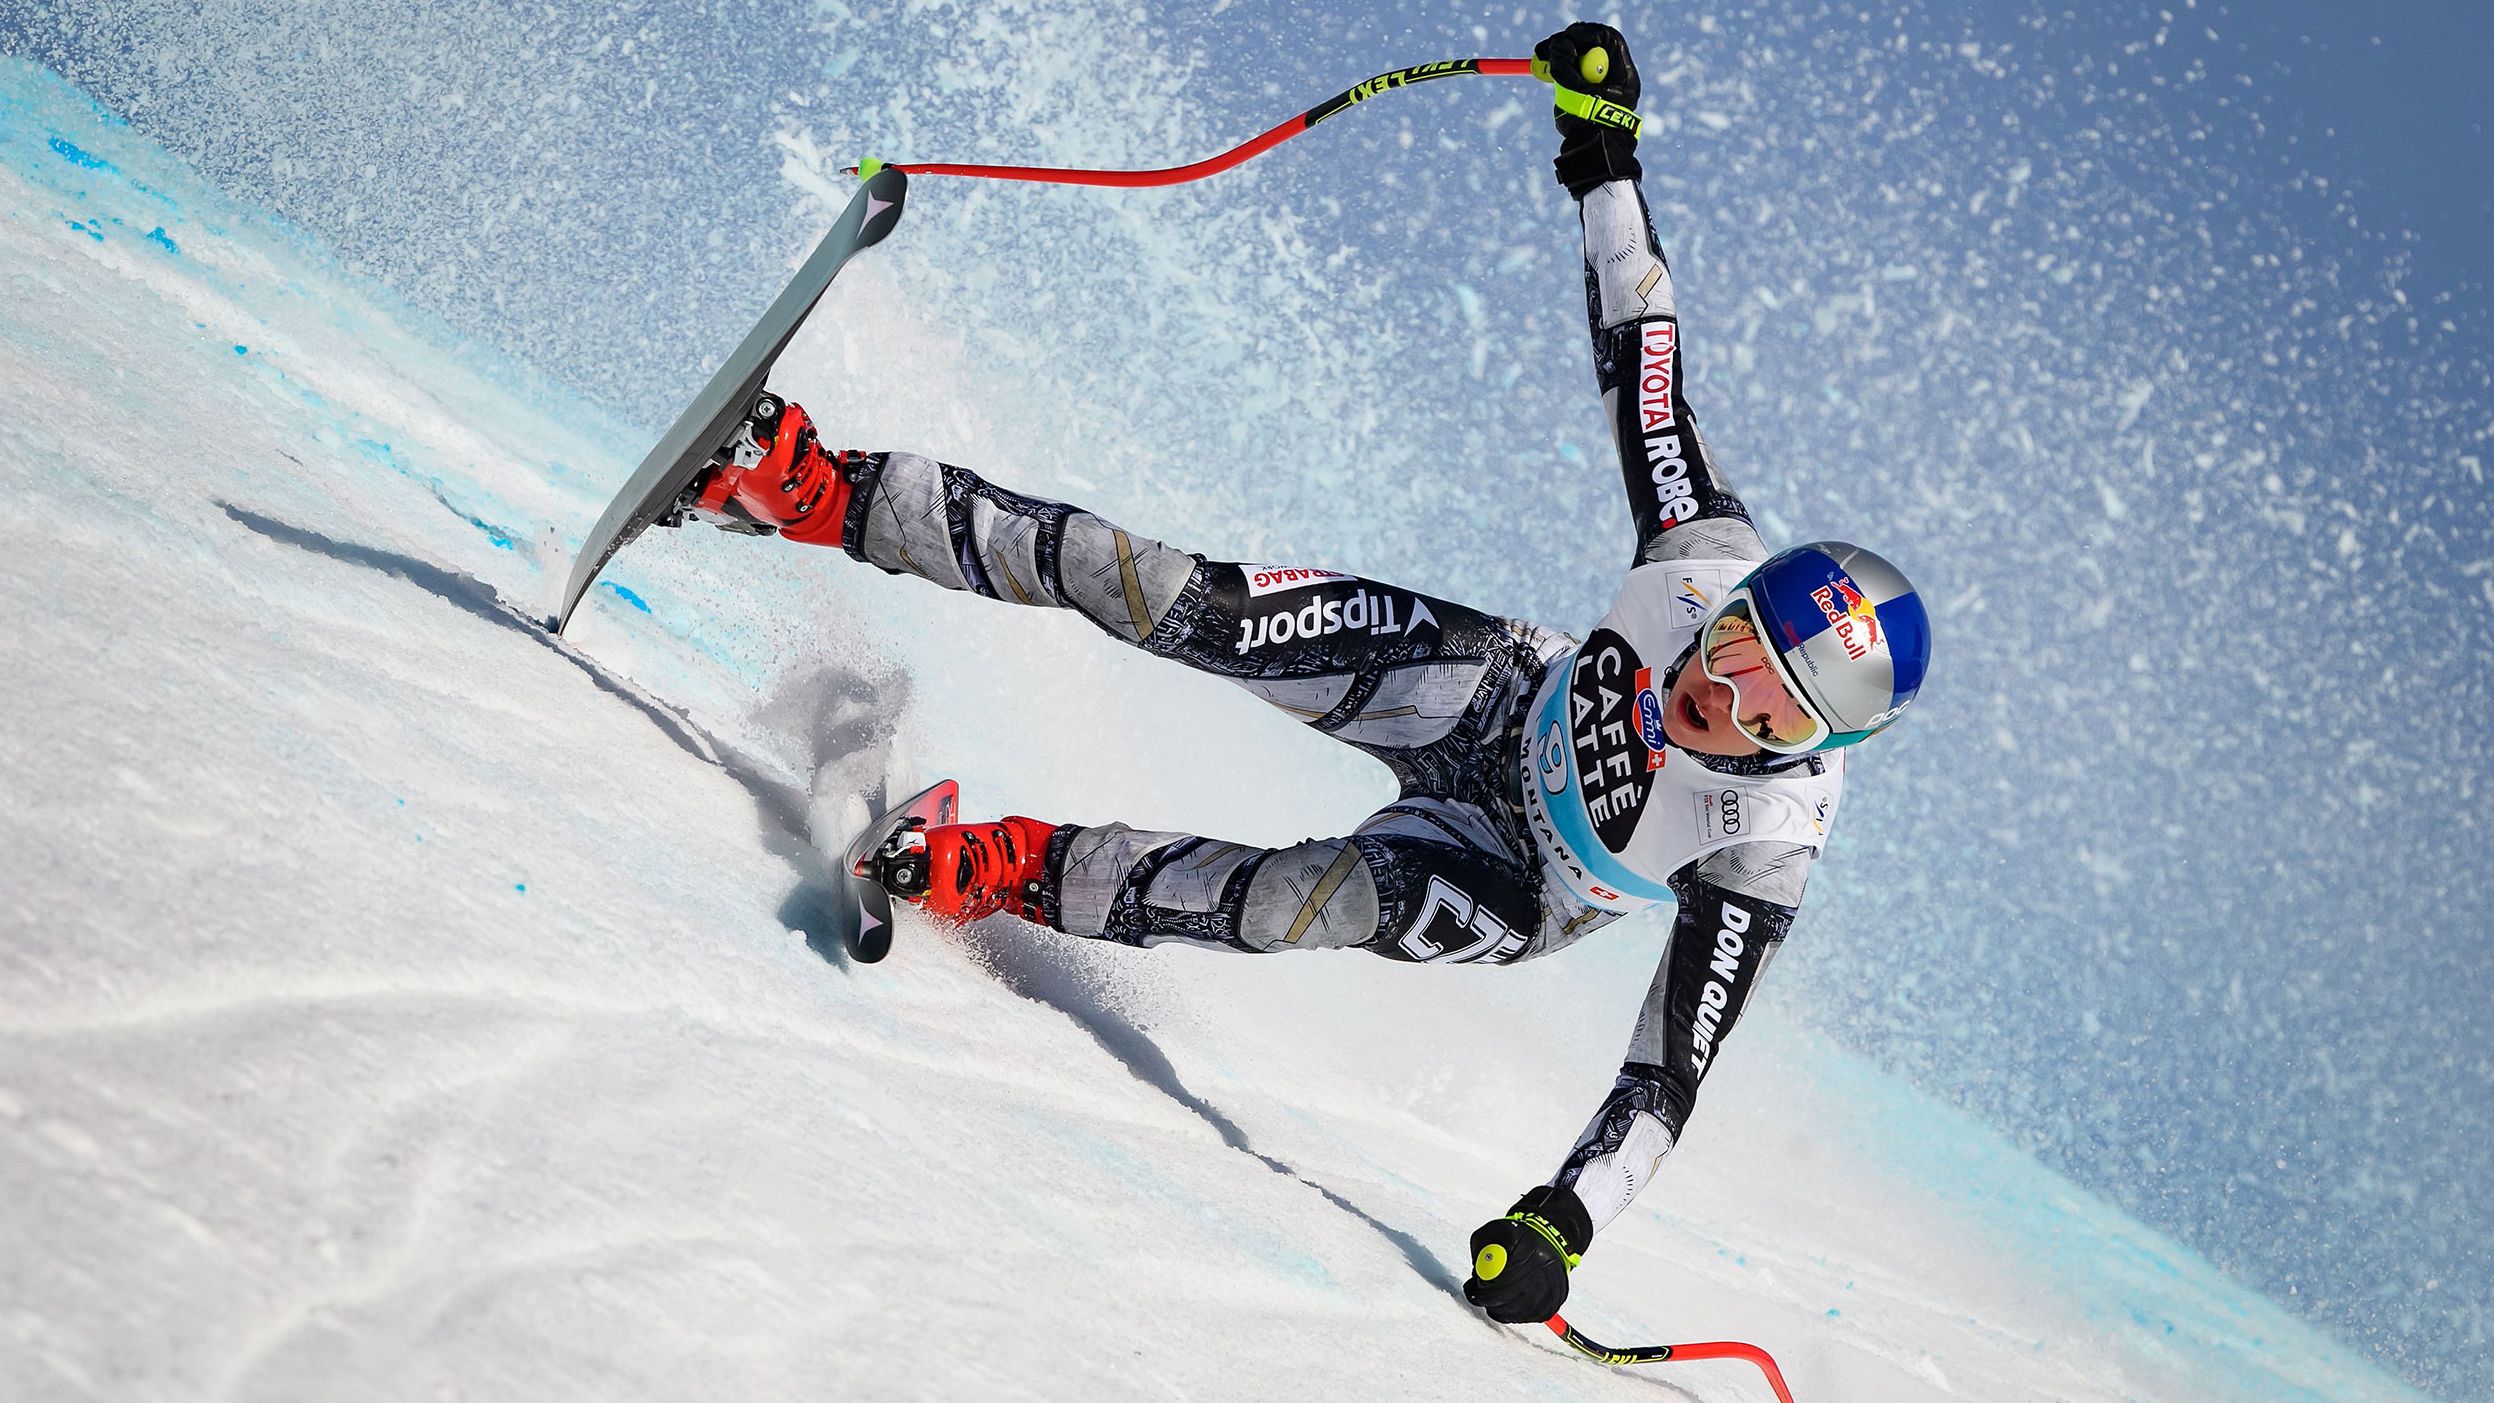 <strong>Ester Ledecká (Czech Republic):</strong> Four years ago, Ledecká became the first athlete in history to compete in both snowboarding and alpine skiing in the same Olympics. <a href="https://www.cnn.com/2018/02/24/sport/ledecka-olympics-slalom-intl/index.html" target="_blank">And she won gold in both,</a> winning the super-G skiing event and then following it up with a victory in parallel giant slalom. It had been 90 years since anyone claimed gold in two different sports at the same Winter Games. Now 26, Ledecká will try to make history in what is her third Olympics.